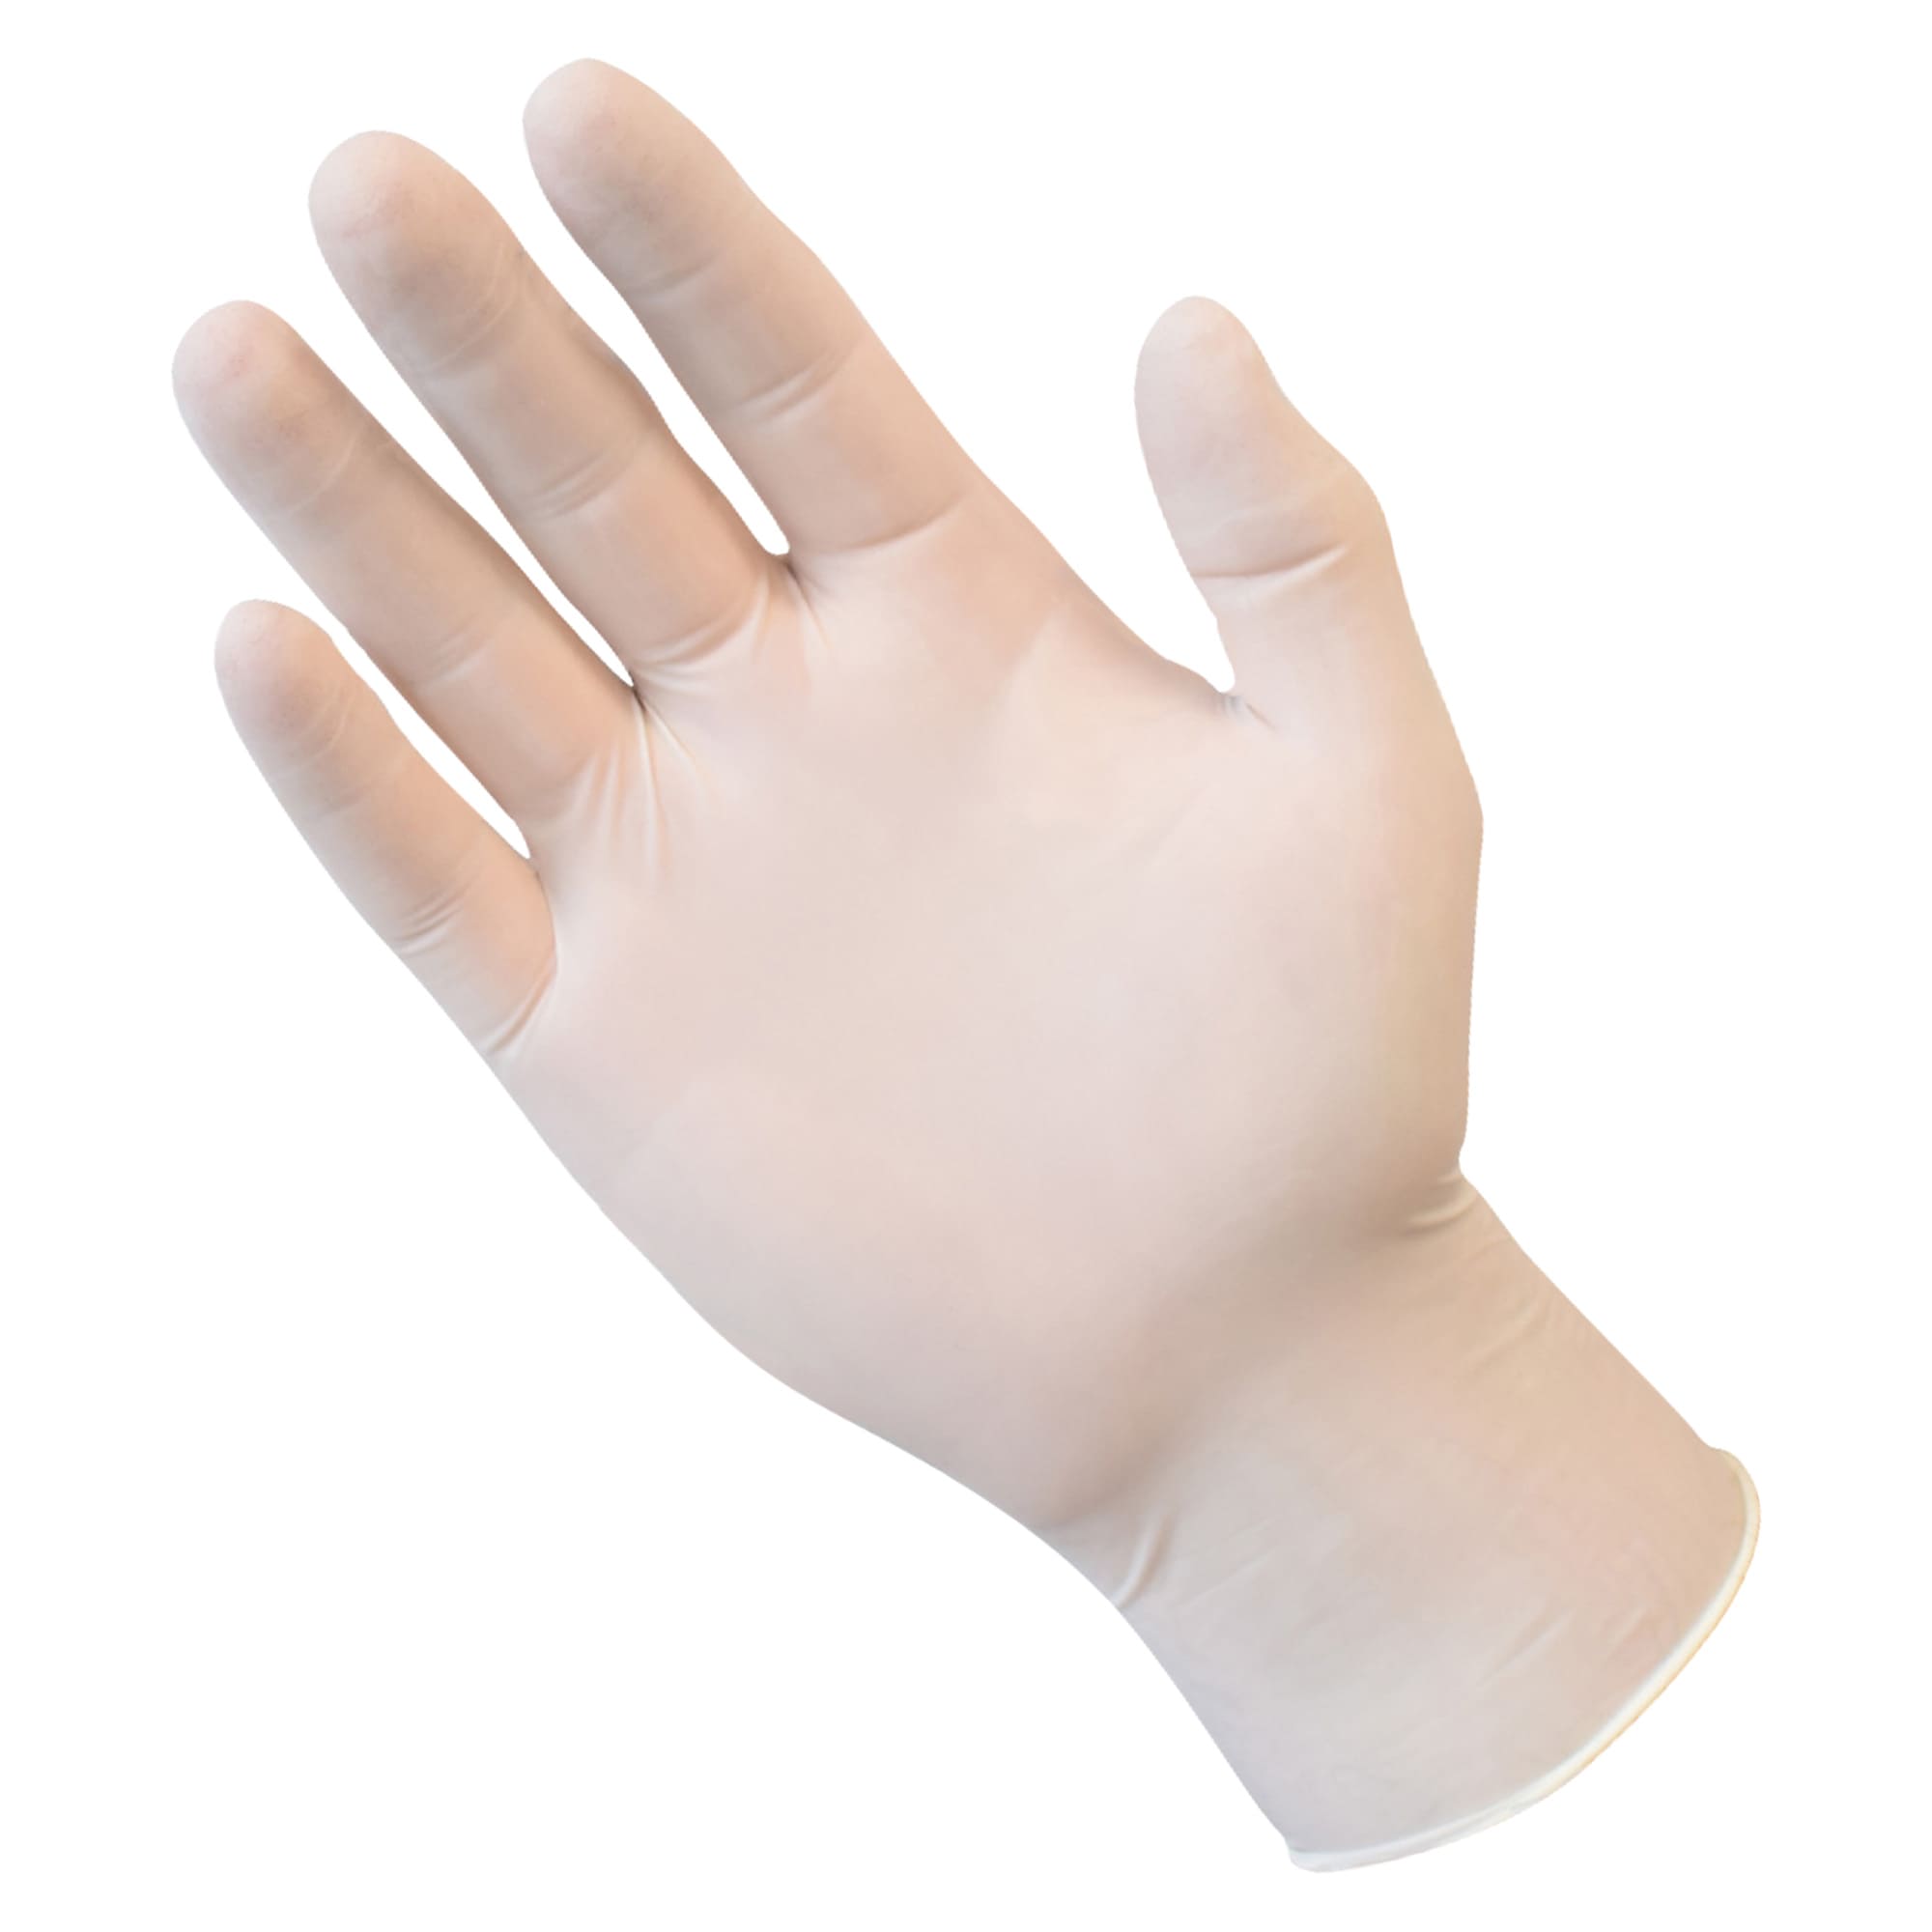 STEELDRILL 468405 - LATEX DISPOSABLE CLEAR POWDER FREE GLOVES